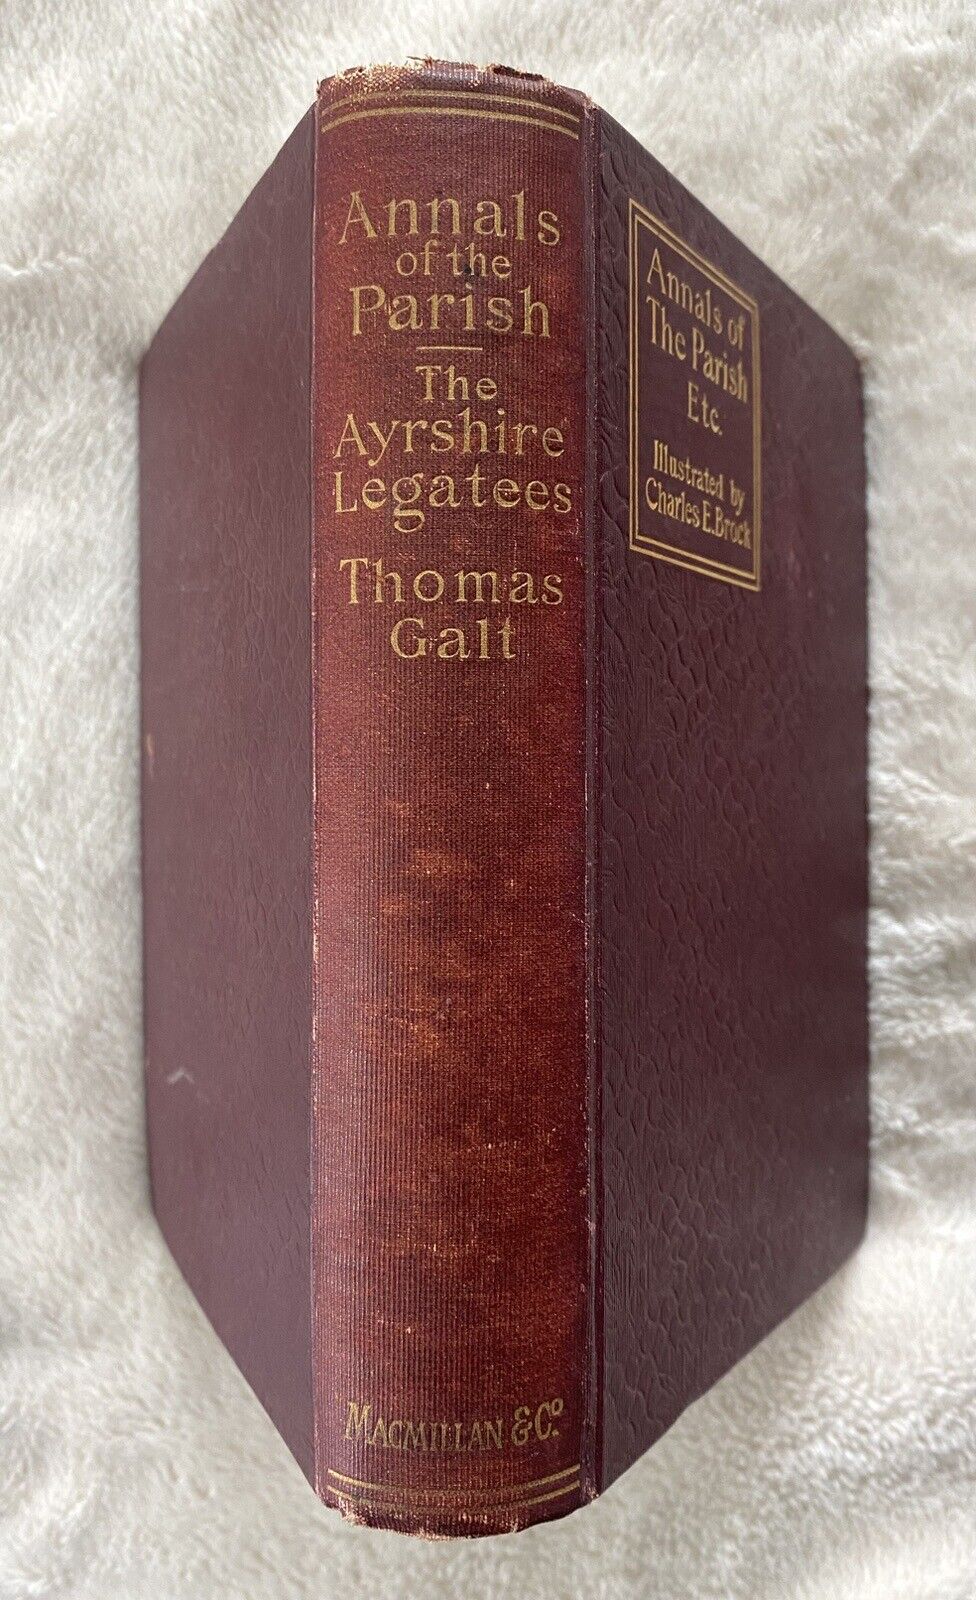 1895 Annals of the Parish and The Ayrshire Legatees by John Galt